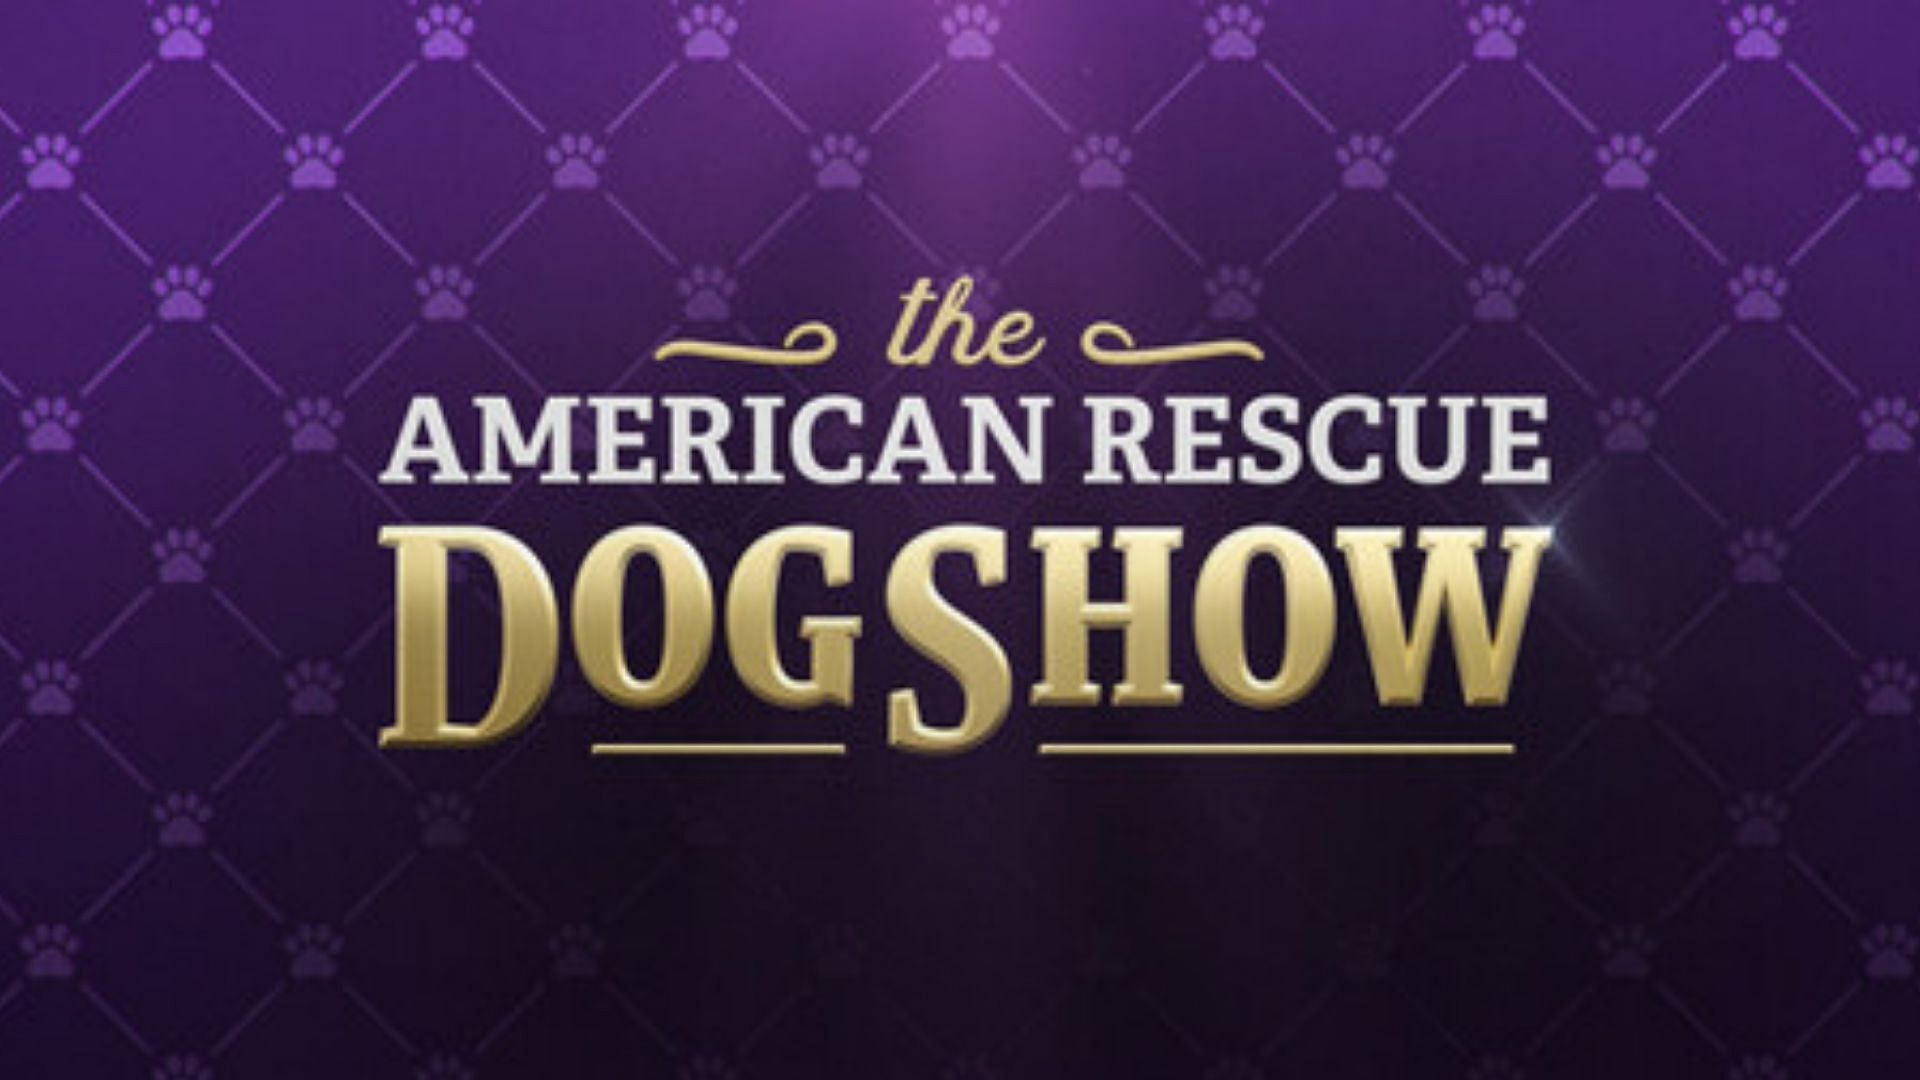 The American Rescue Dog Show honors rescue dogs from all over the country (Image via ABC)